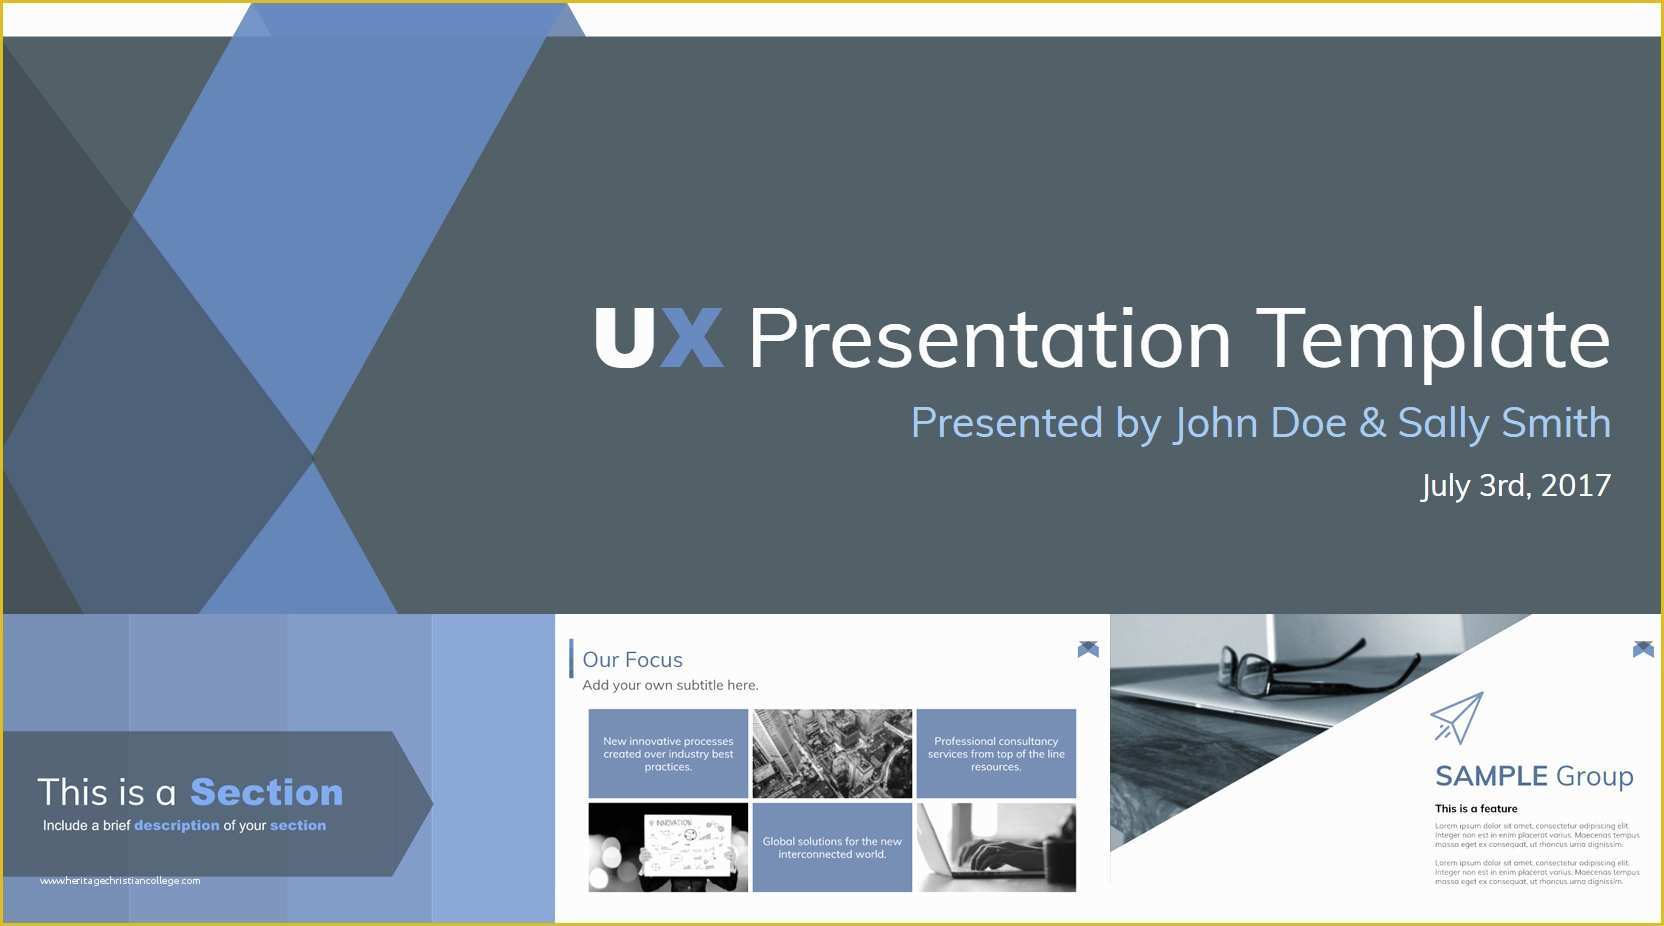 Free Google Sites Templates Professional Of 30 Free Google Slides Templates for Your Next Presentation